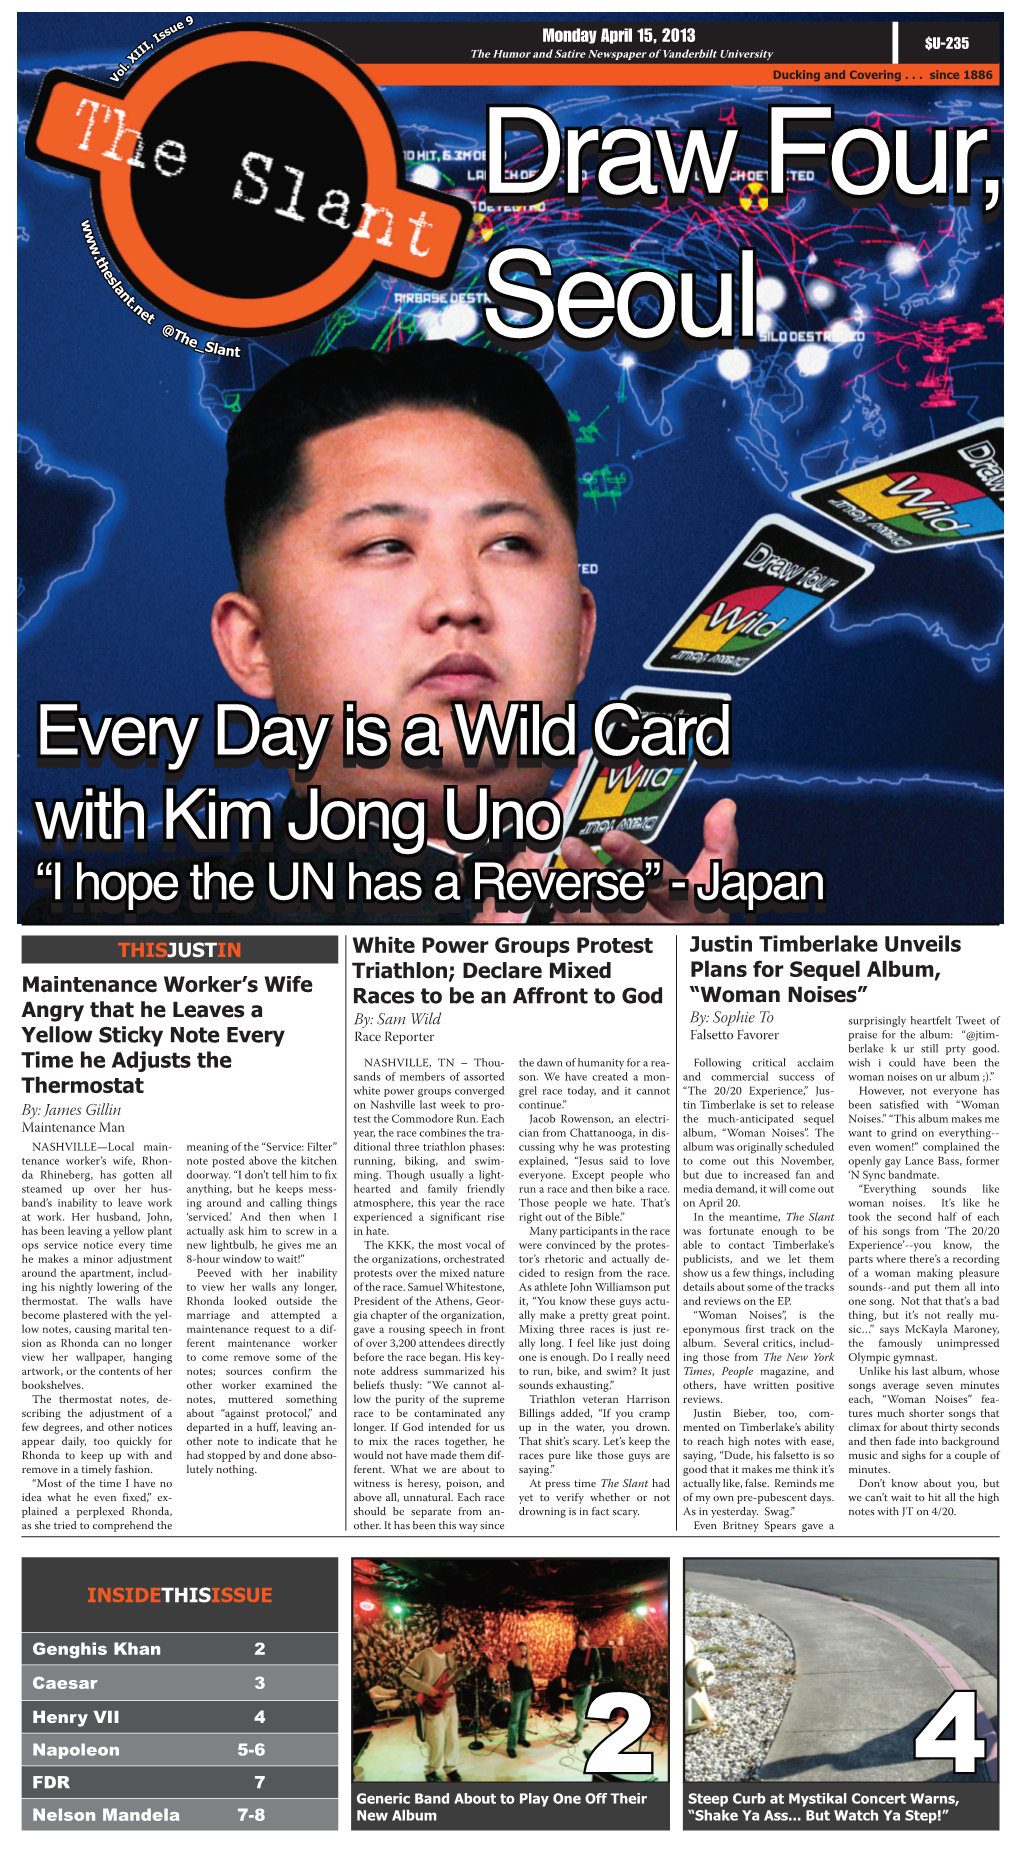 Every Day Is a Wild Card with Kim Jong